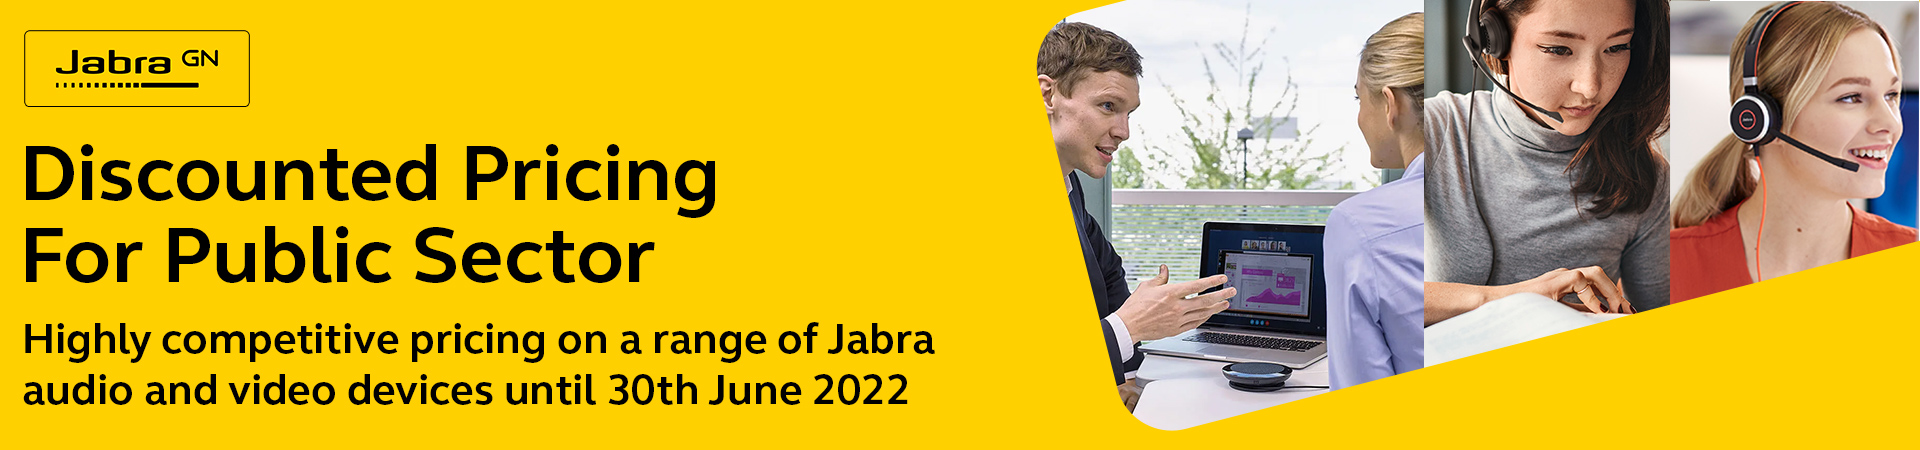 Jabra GN - Discounted Pricing For Public Sector - Highly competitive pricing on a range of Jabra audio and video devices until 30th June 2022